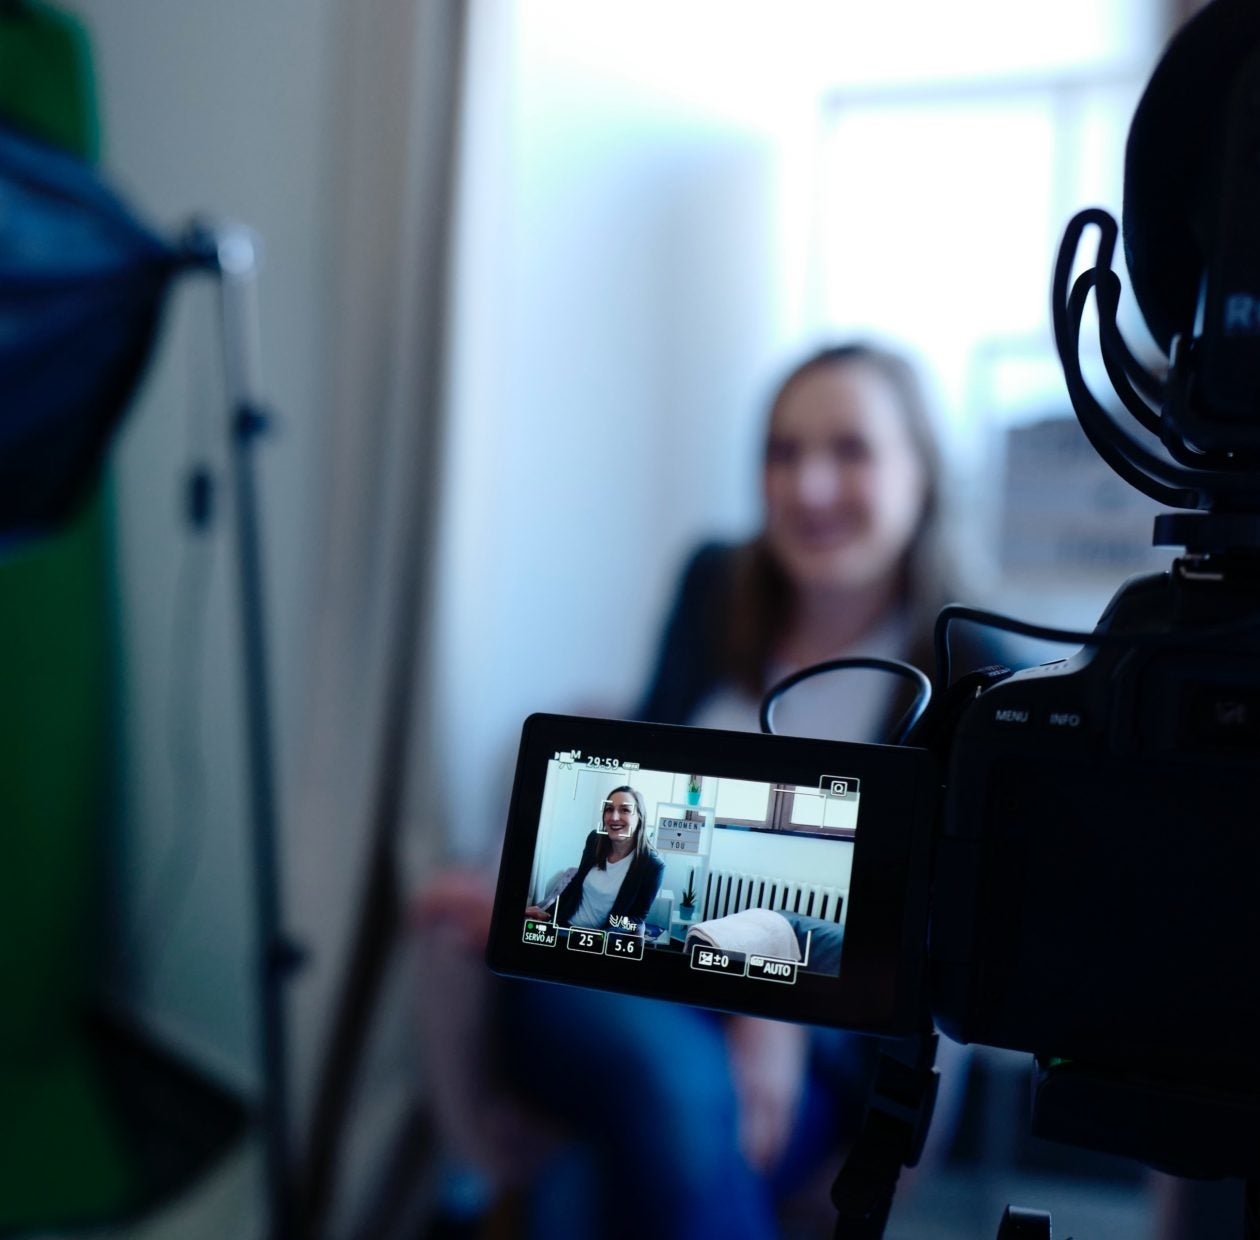 Digital, Accelerated: How to Use Video to Connect with Customers